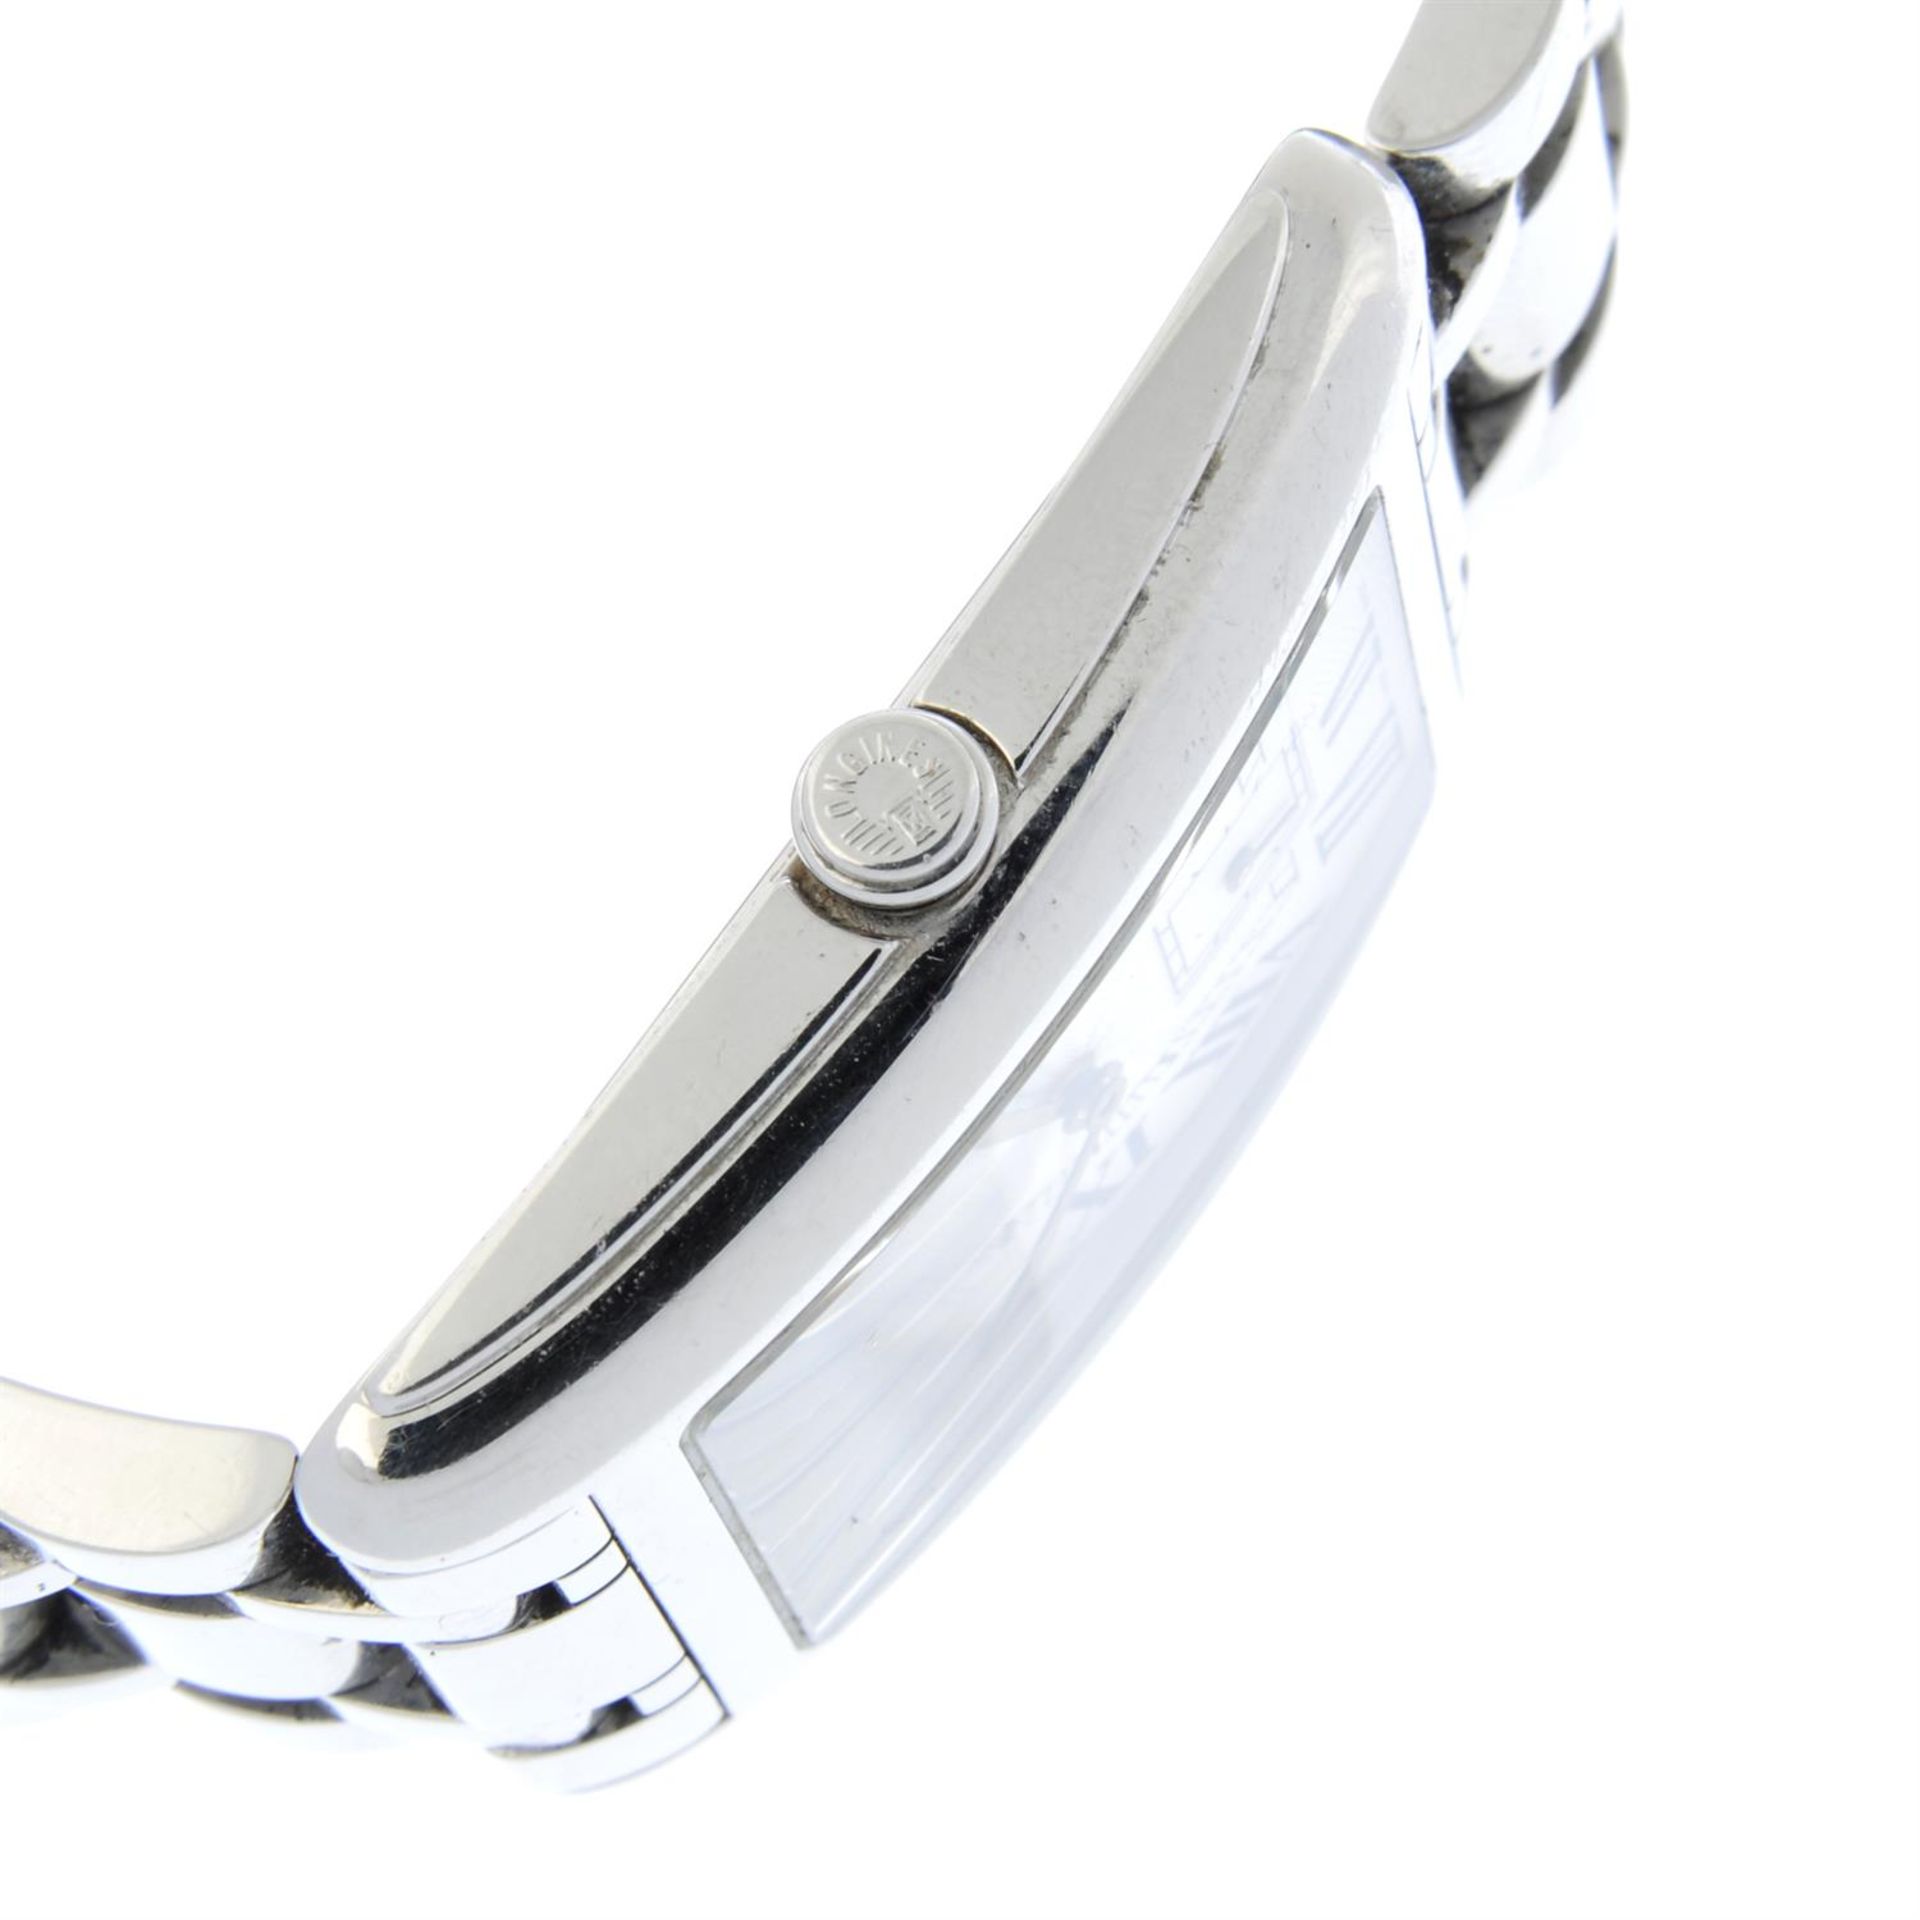 LONGINES - a stainless steel Dolce Vita bracelet watch, 26x33mm. - Image 3 of 4